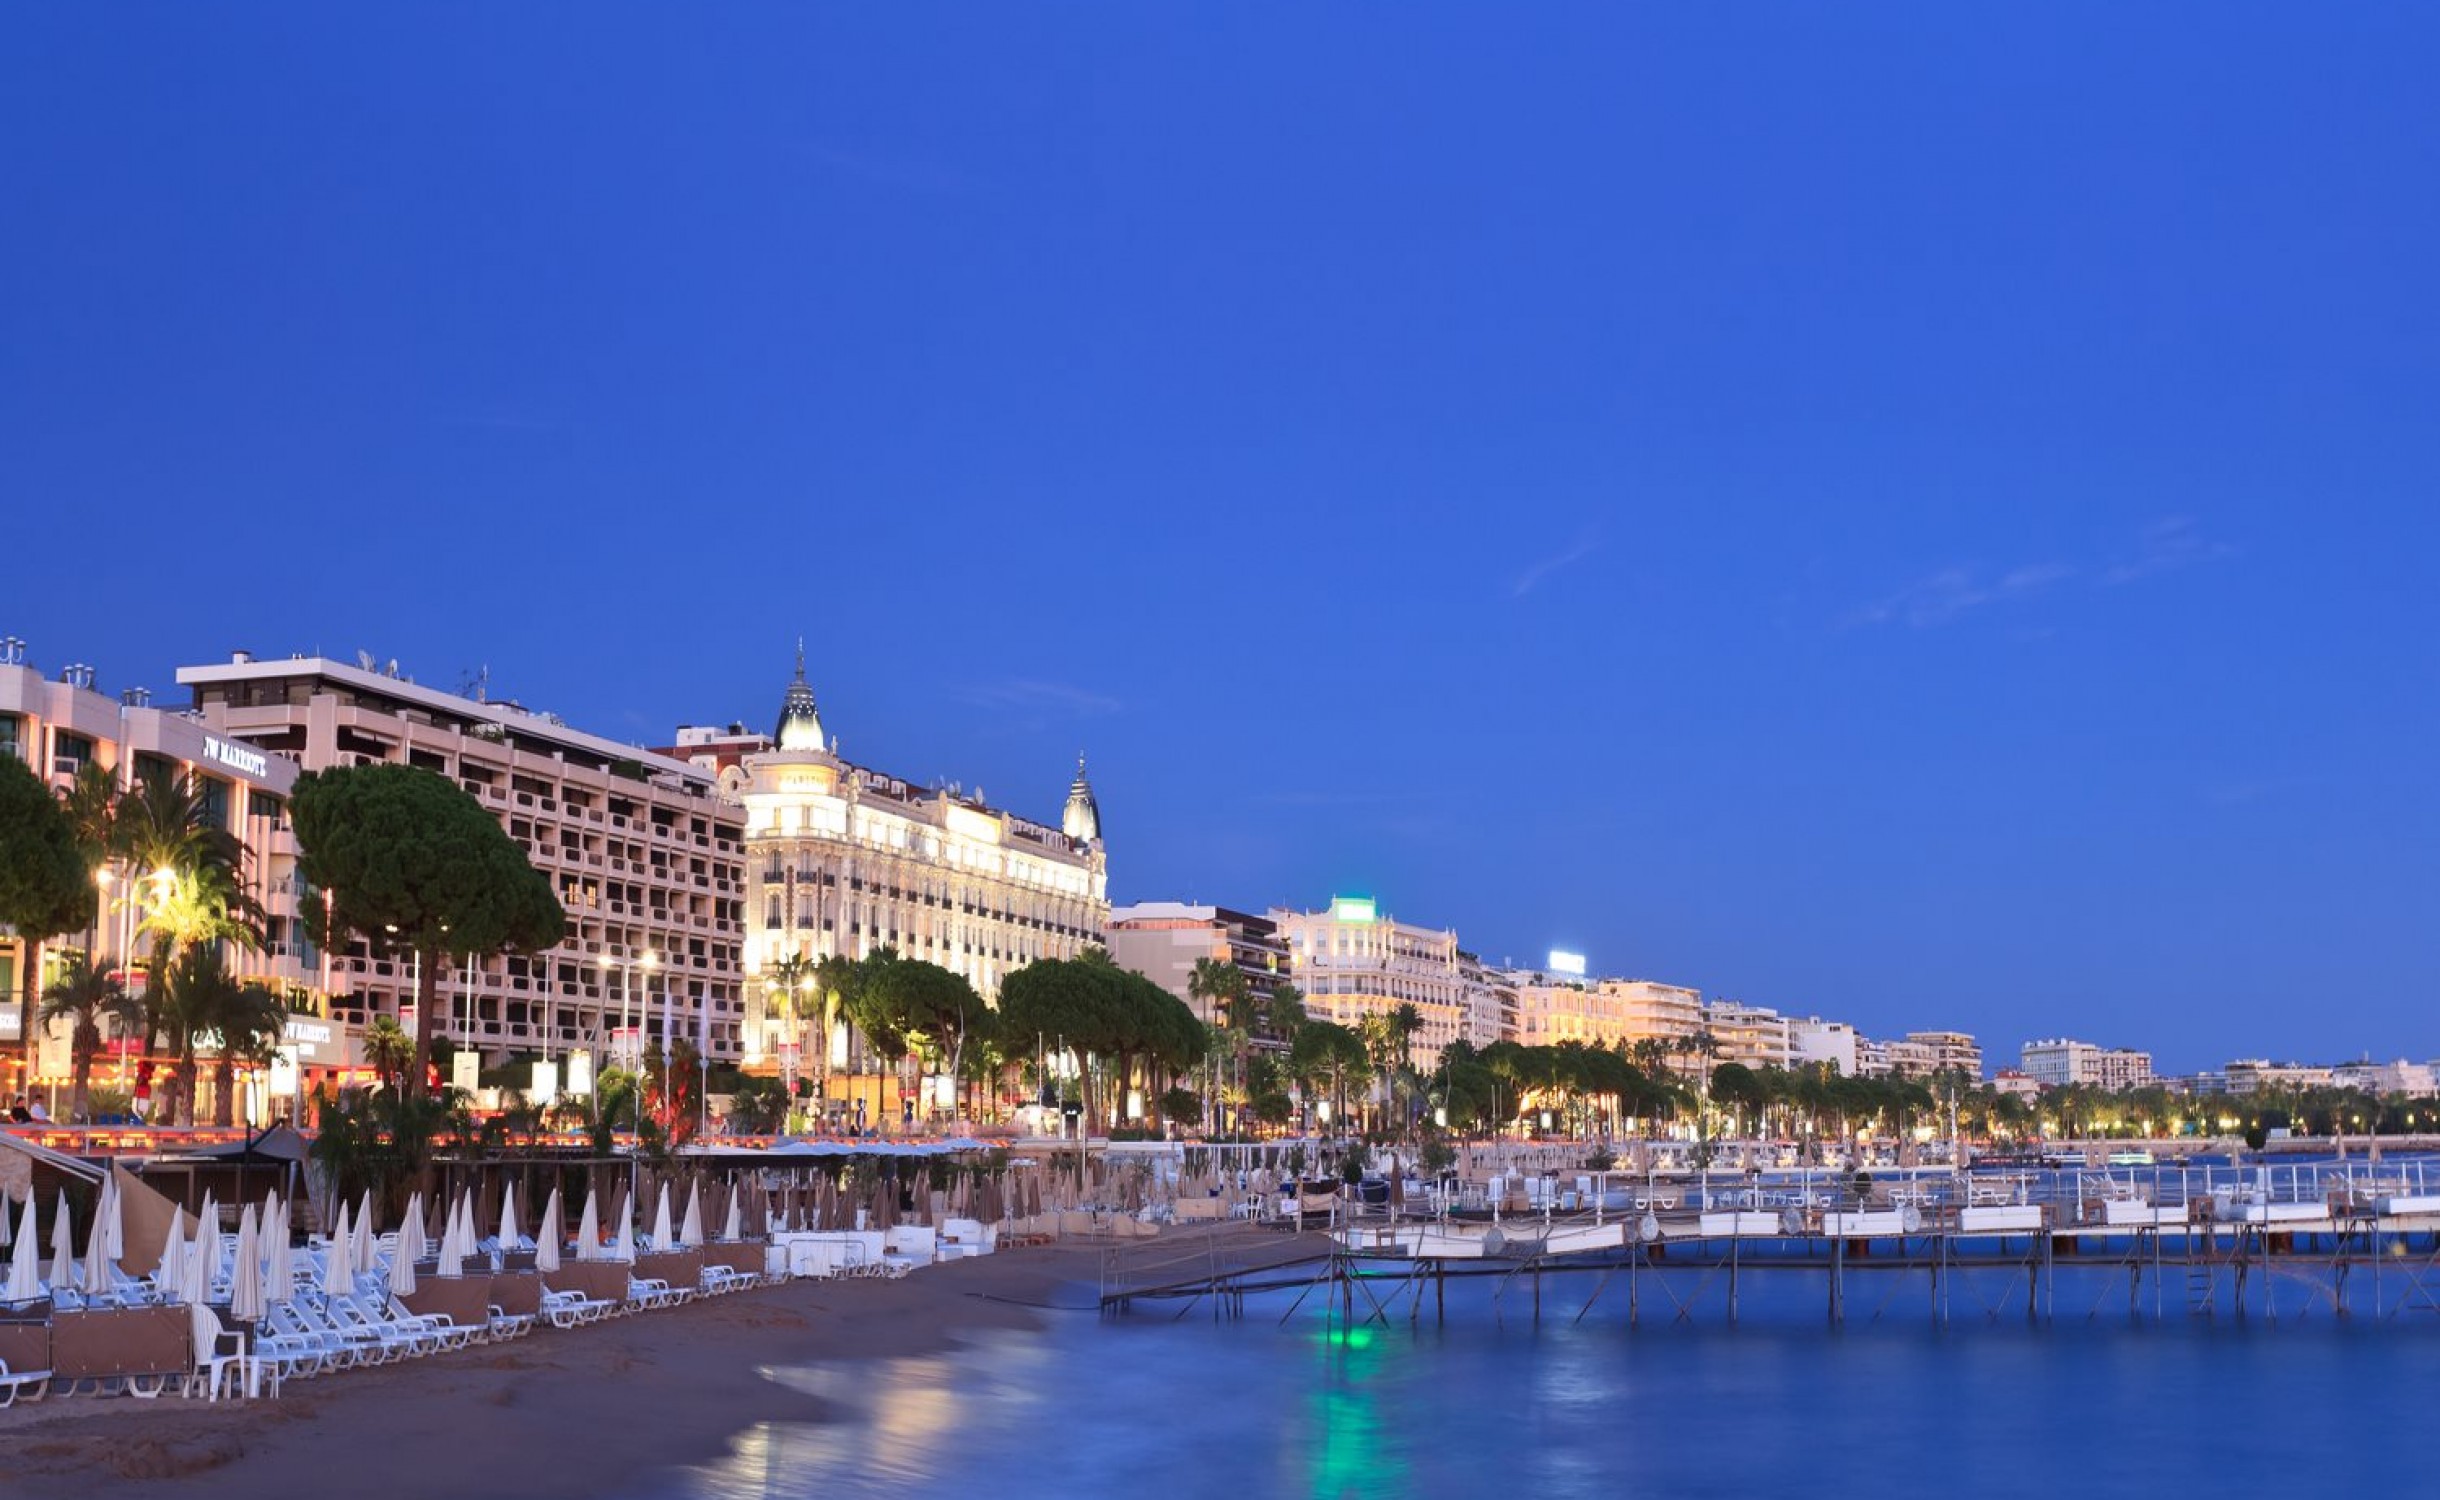 Book a Limousine in Cannes